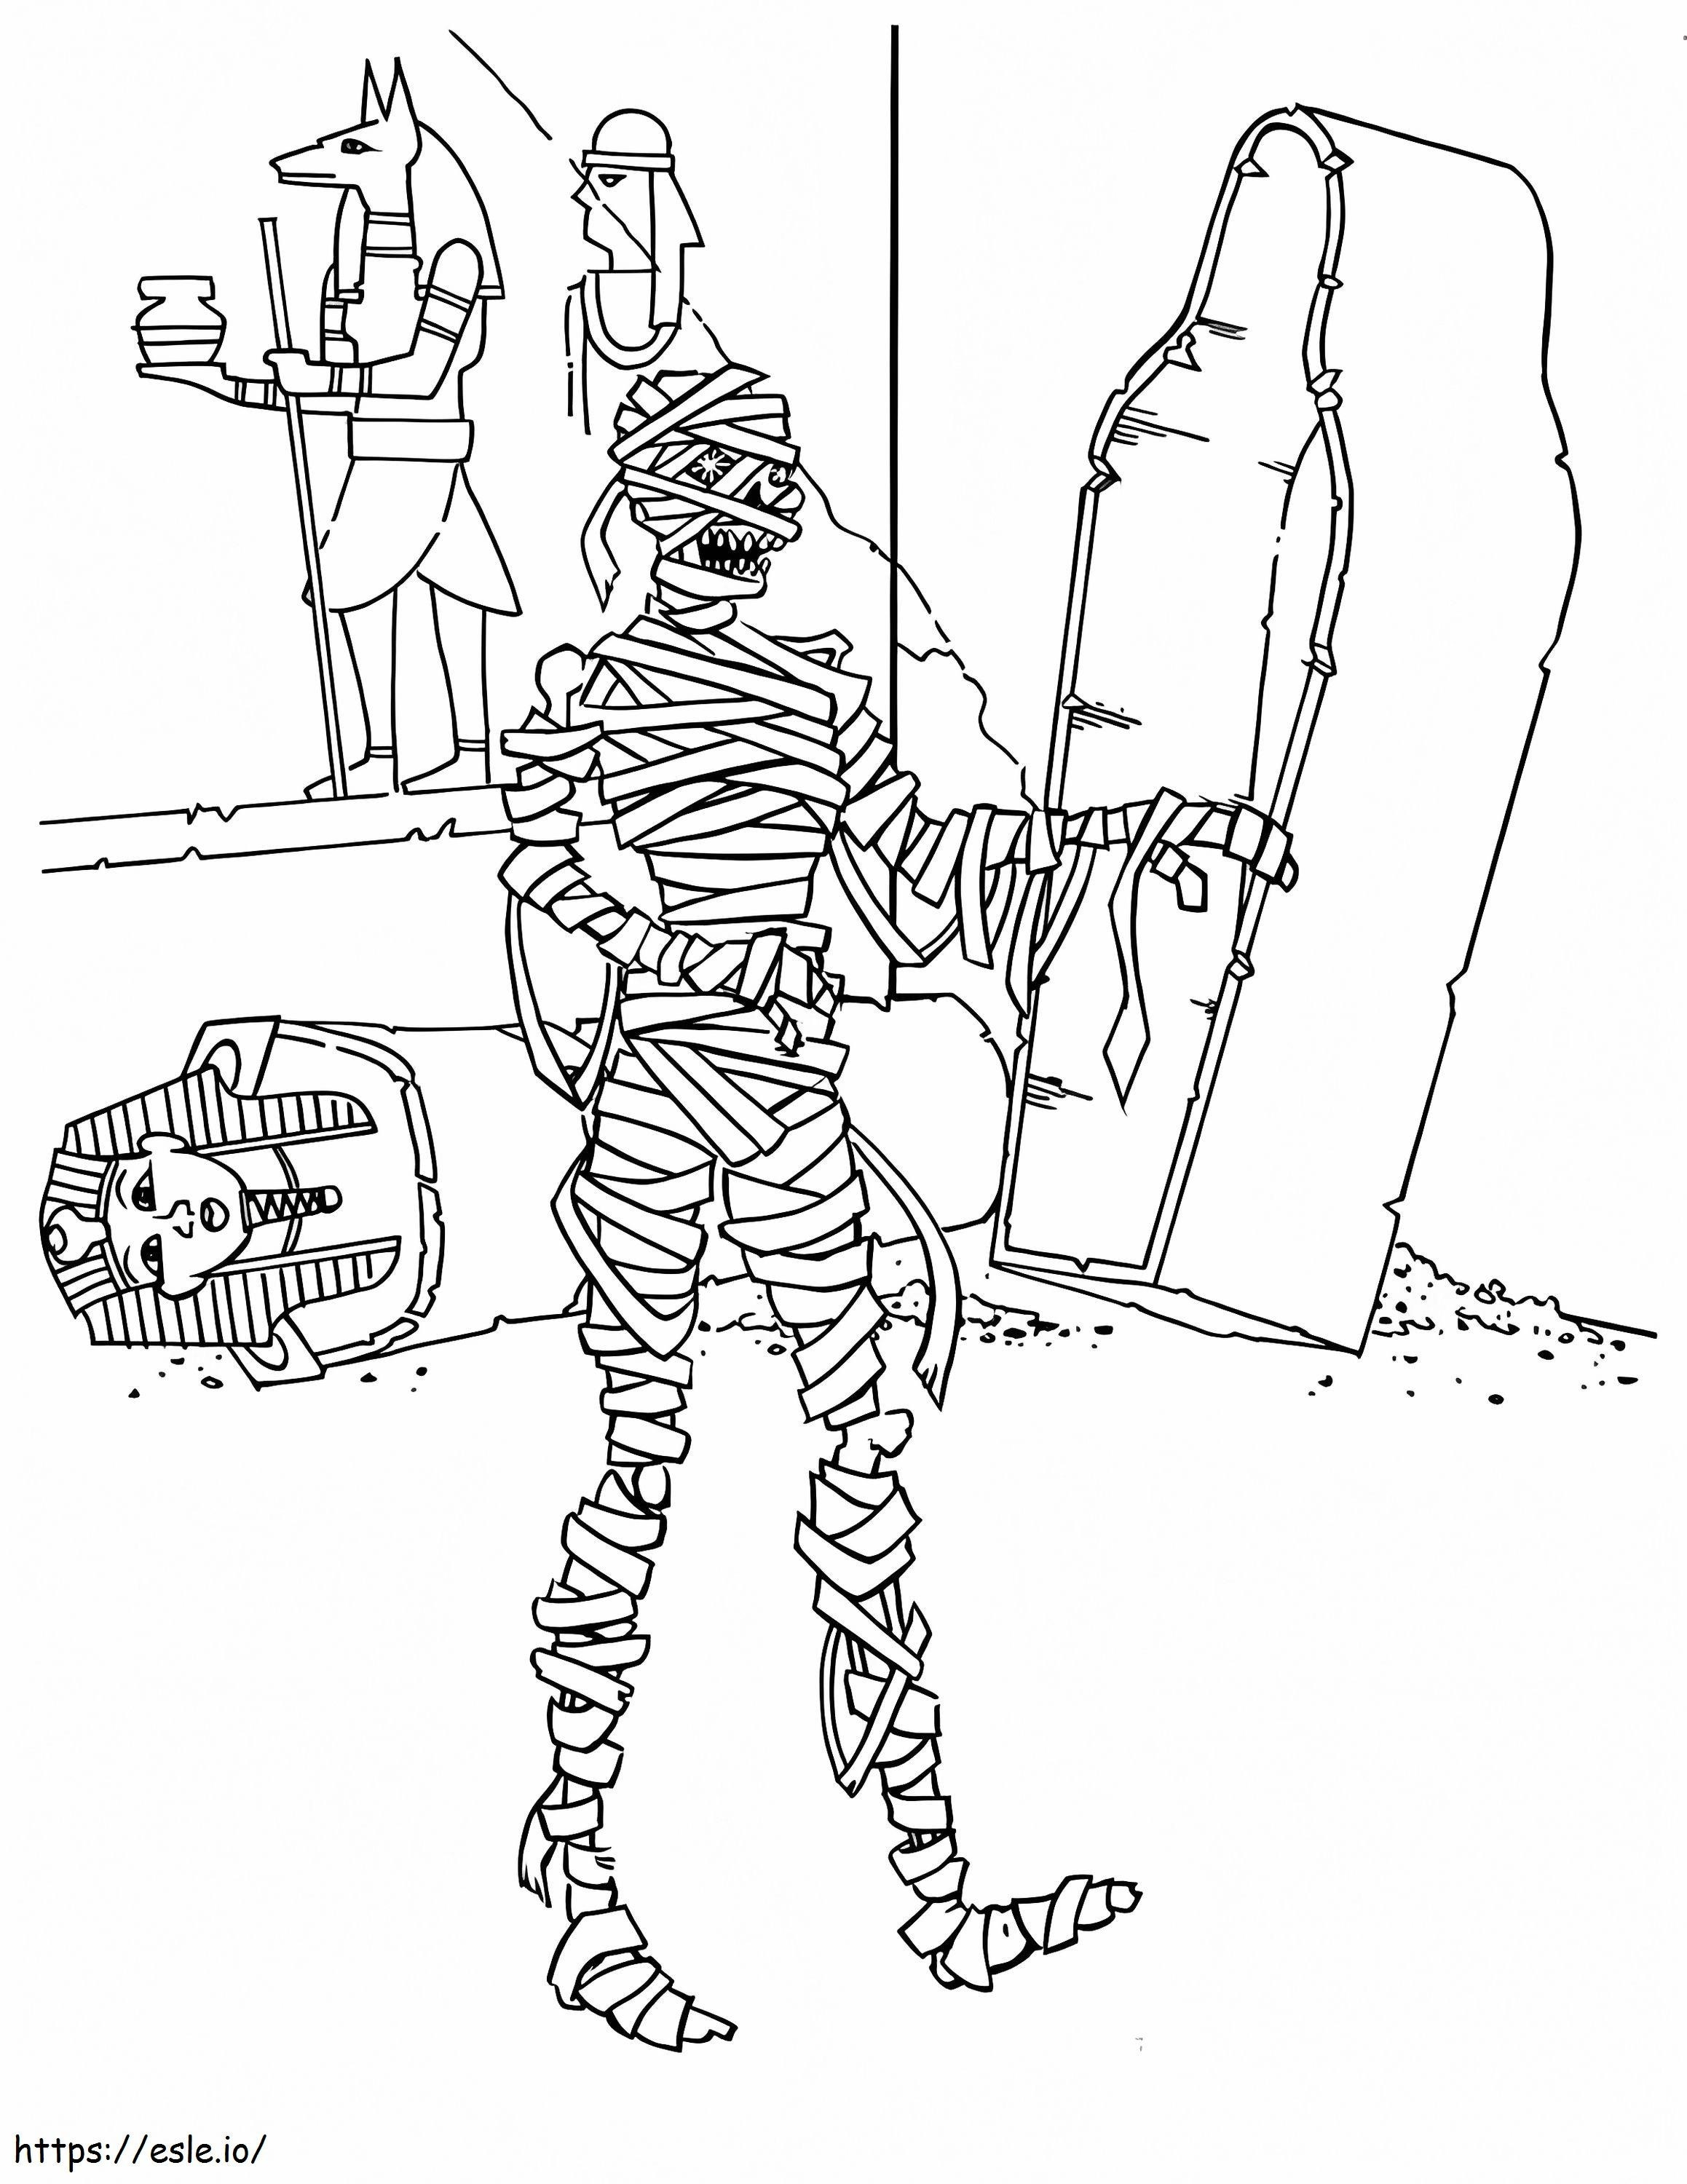 A Creepy Mummy Coloring Page coloring page